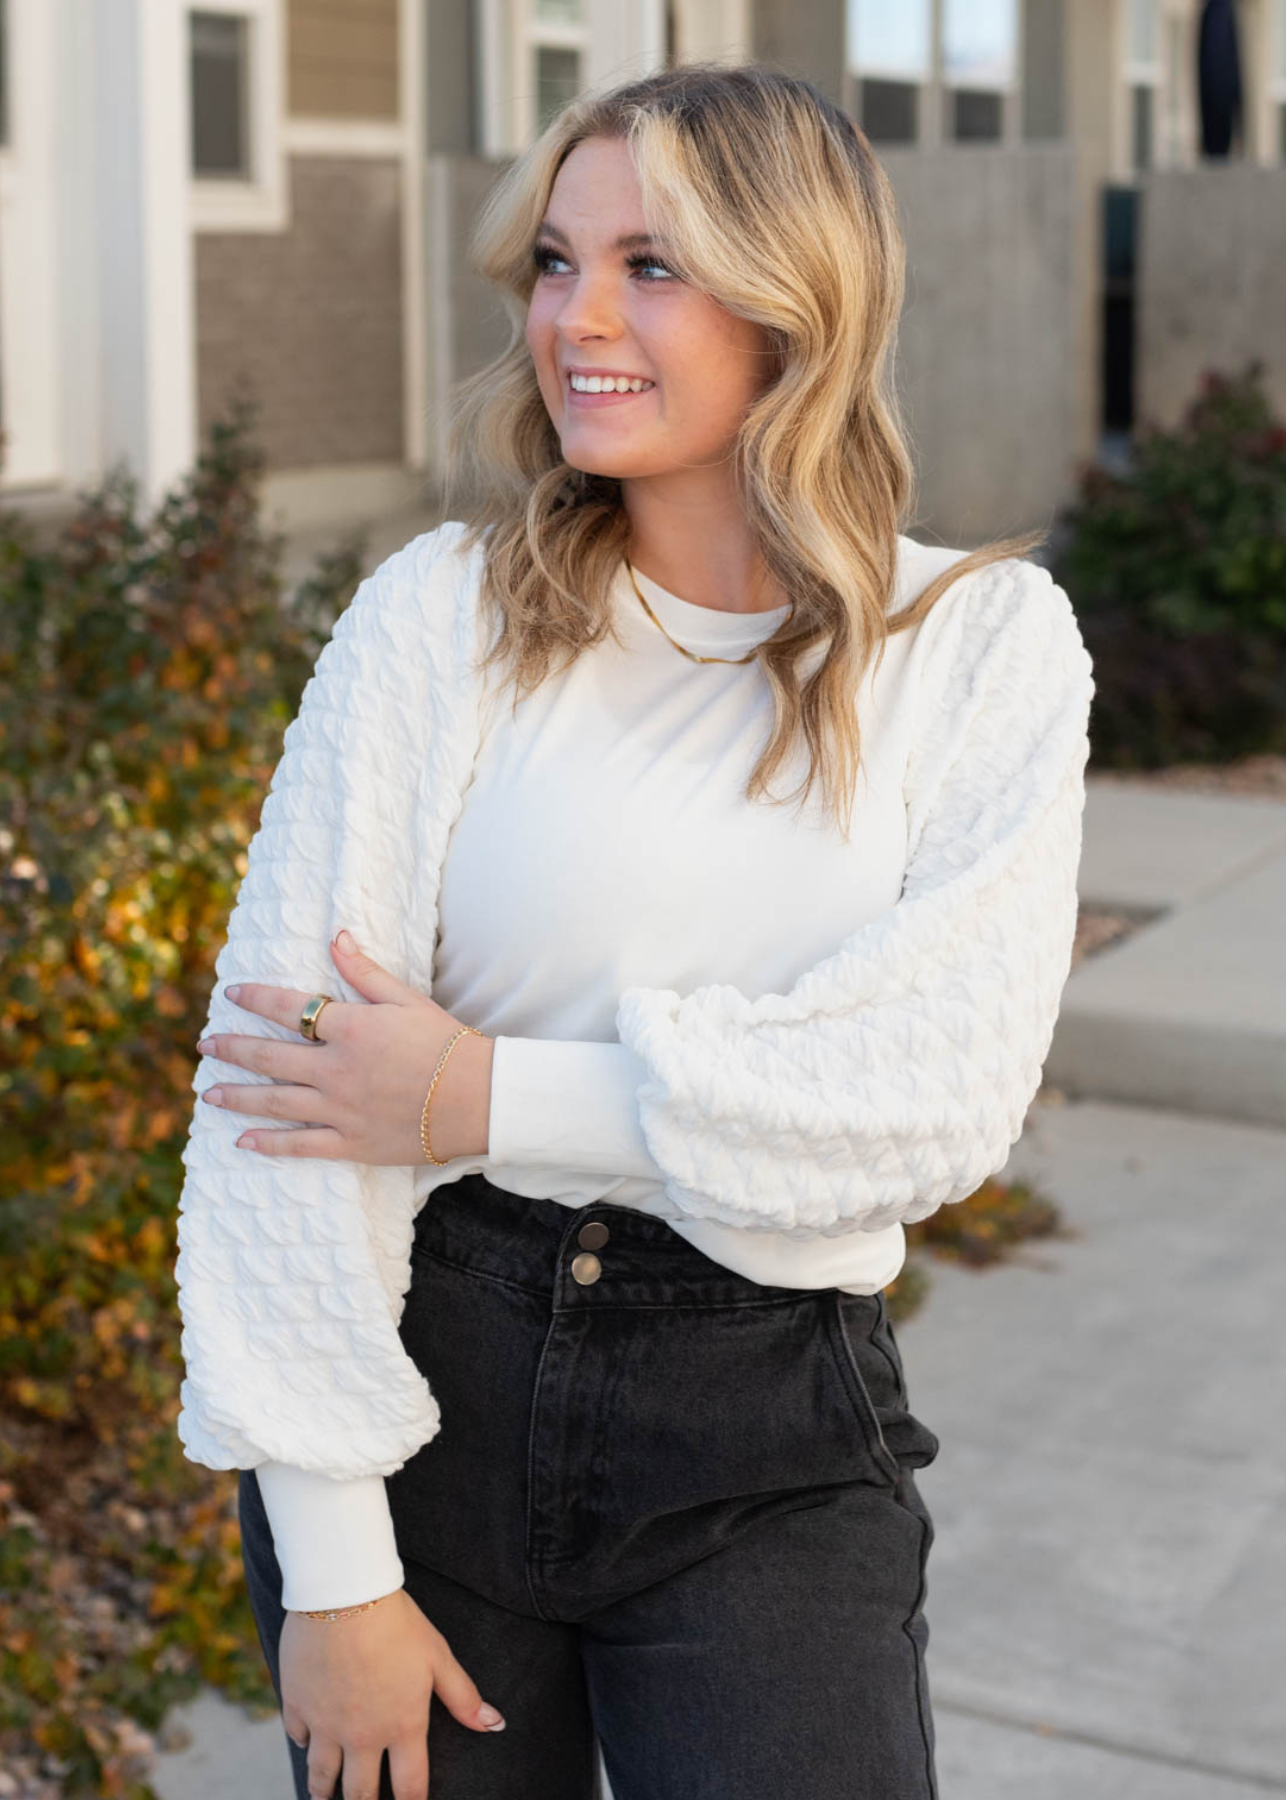 Textured long sleeves on a ivory top